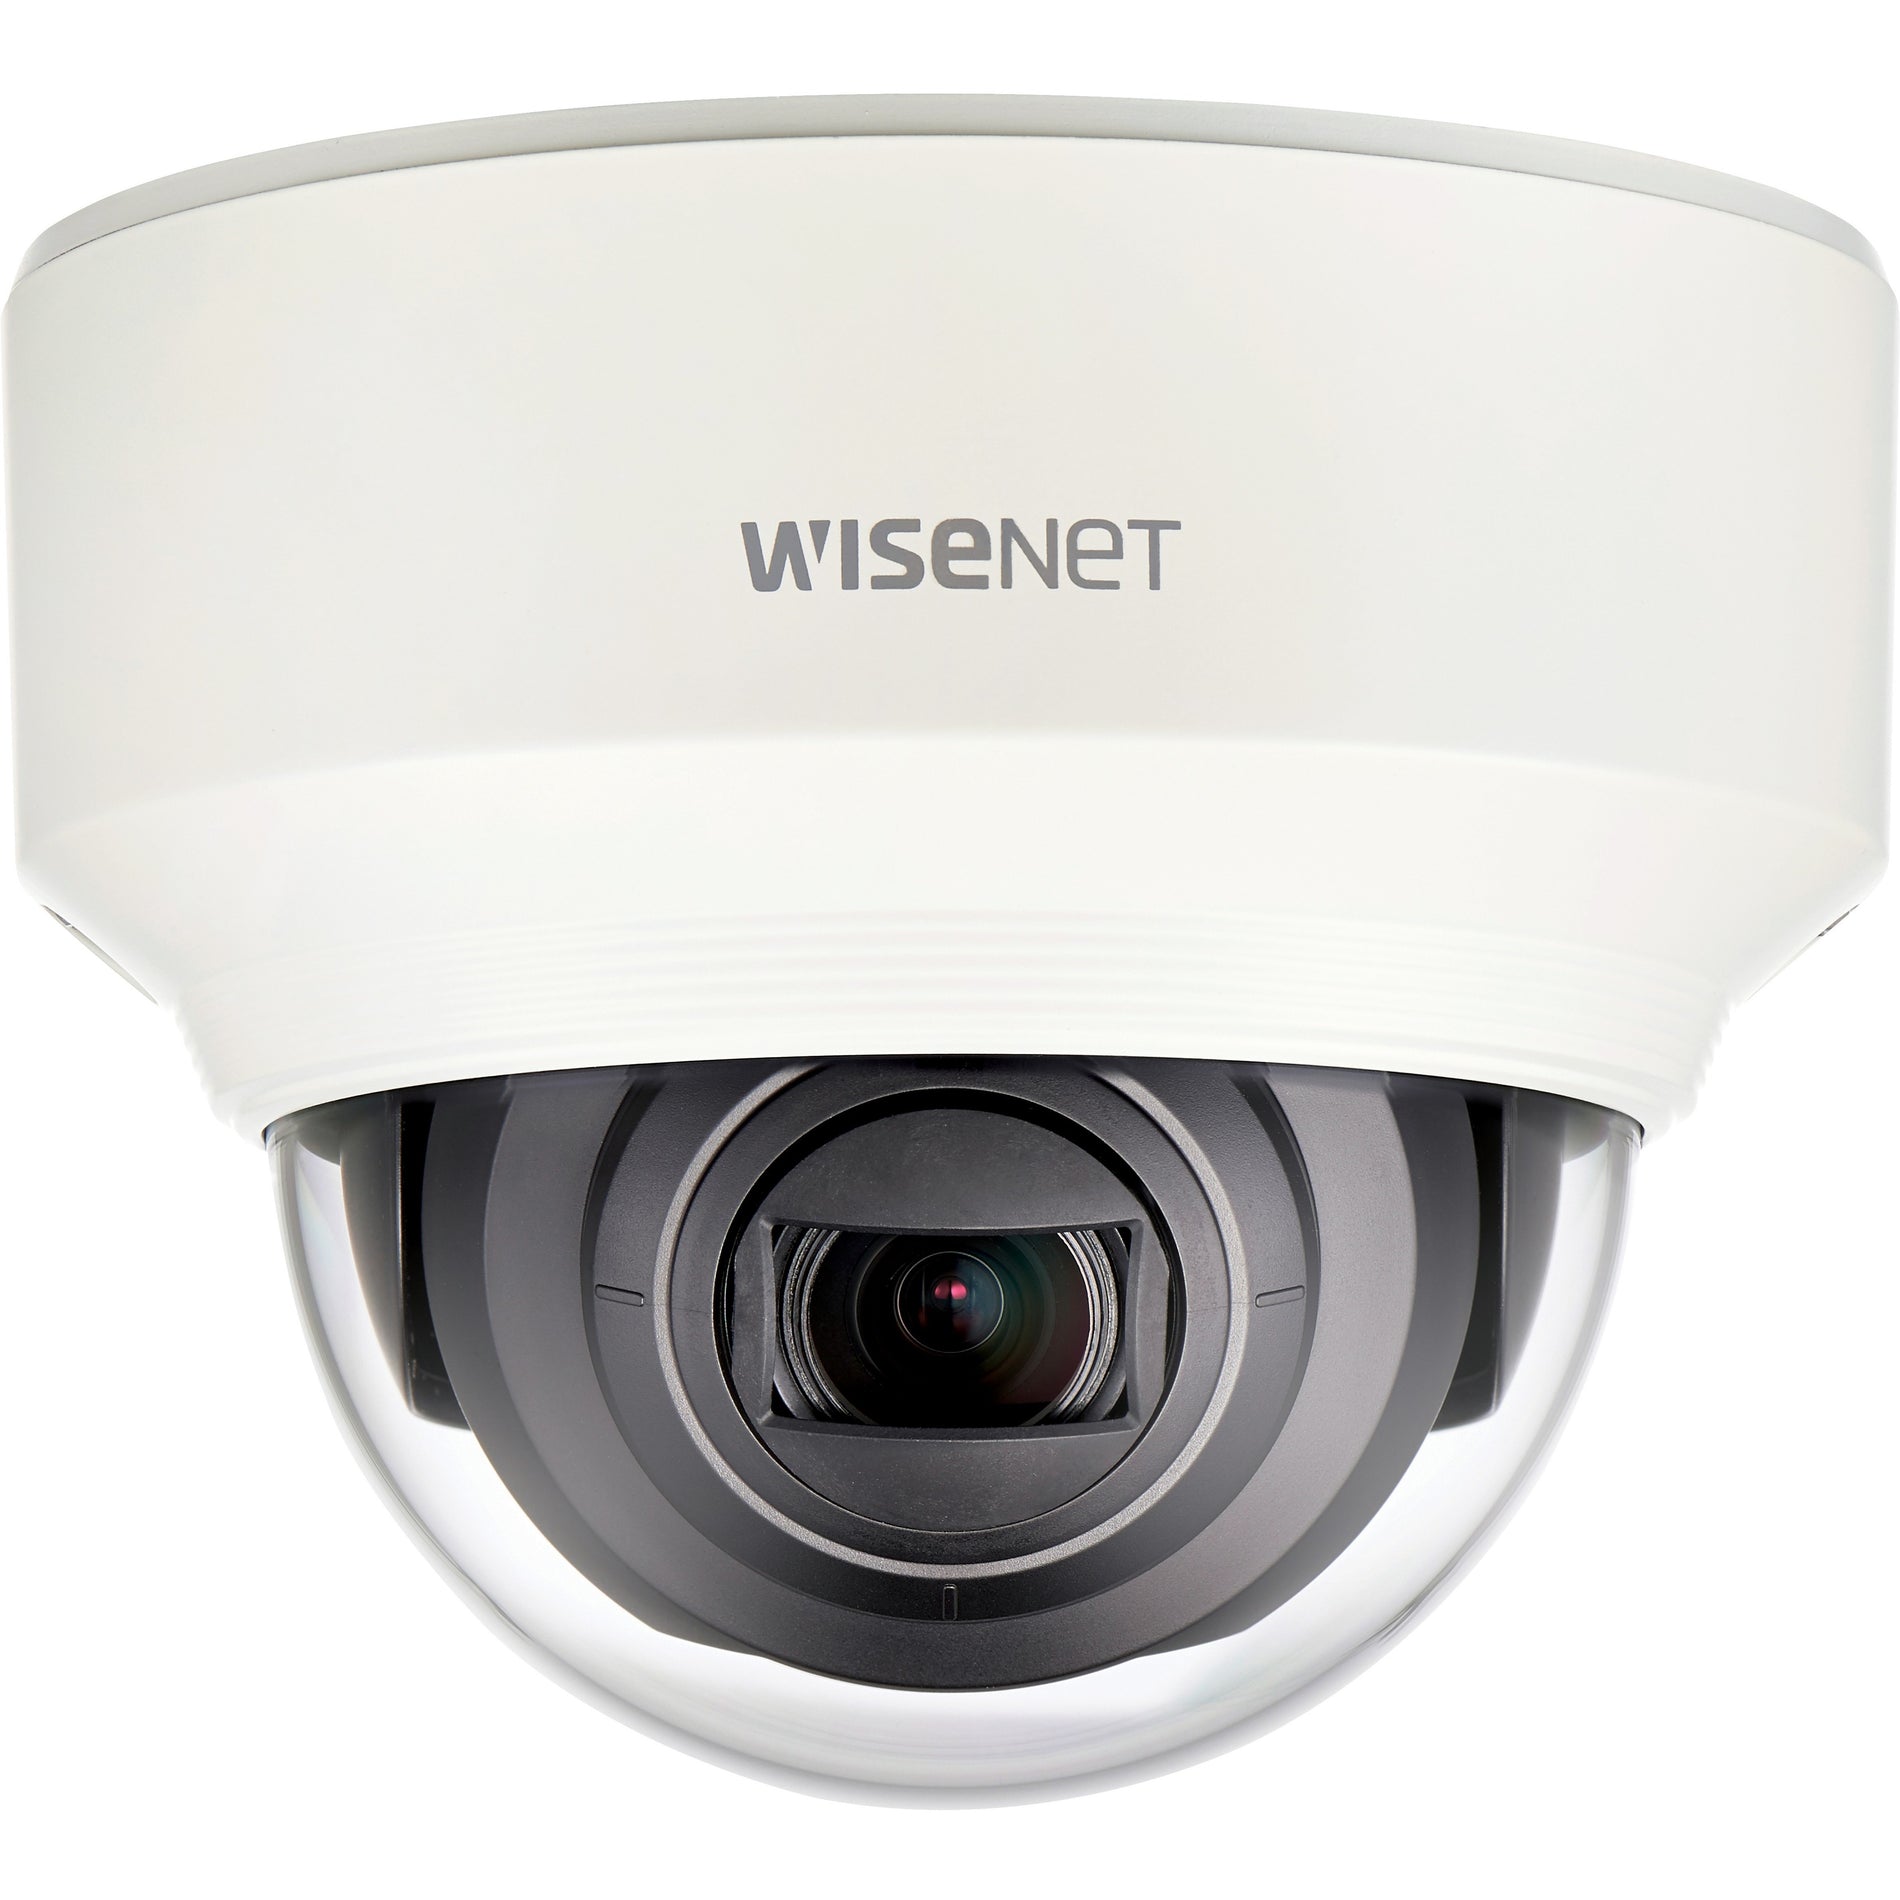 Wisenet XND-6080V 2MP Network Indoor Dome Camera, Full HD, Wide Dynamic Range, Motion Detection